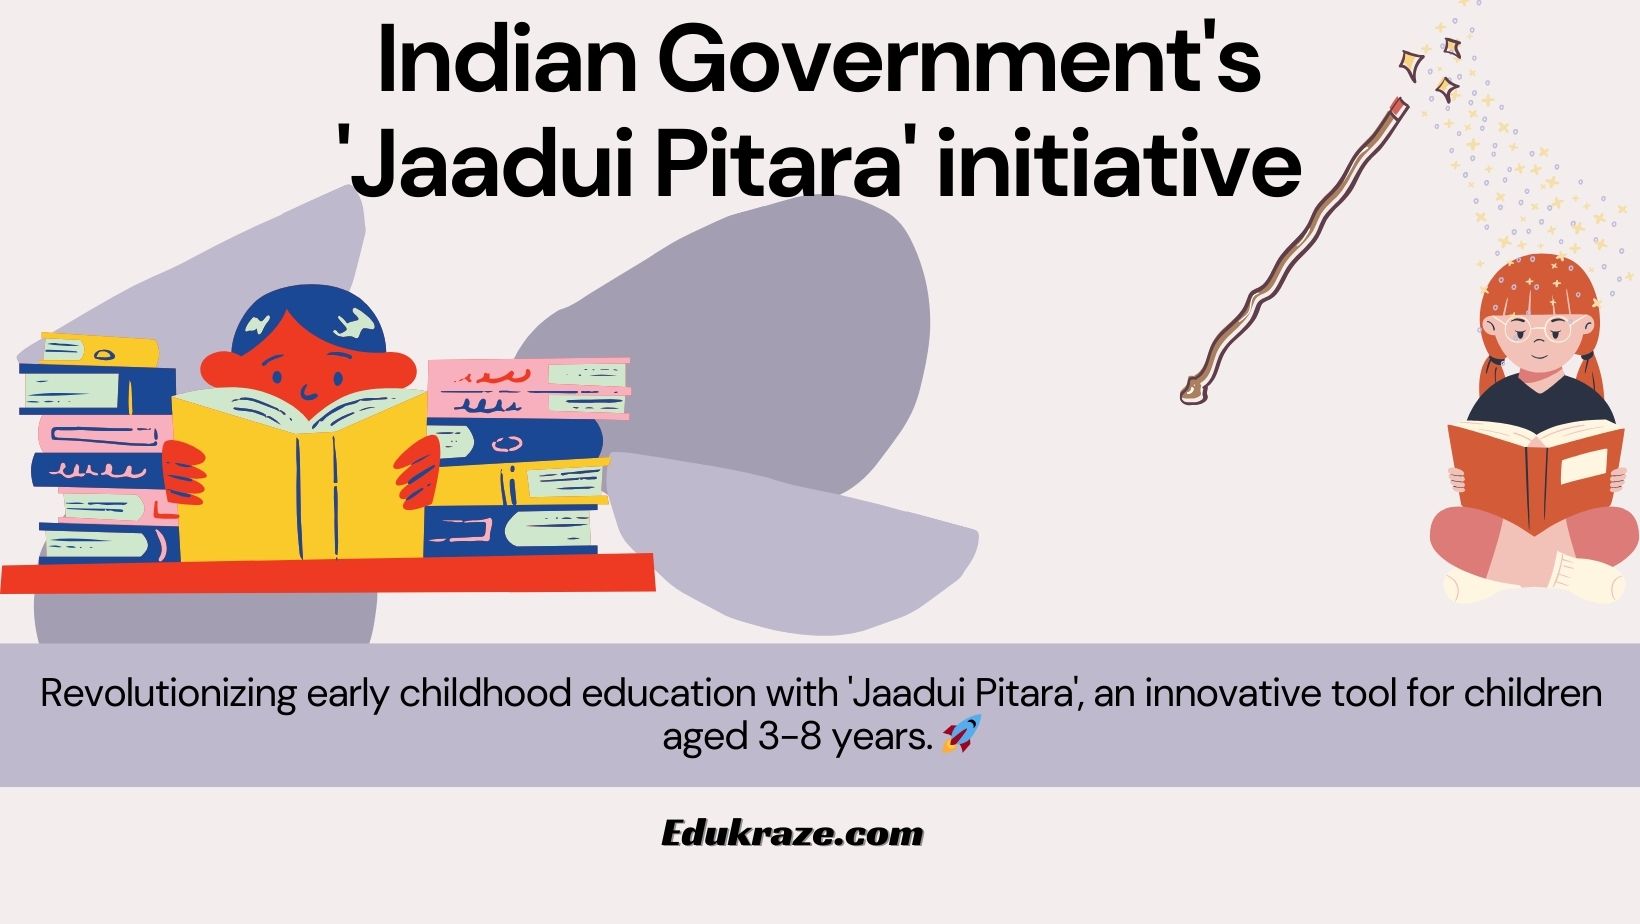 Indian Government introduced 'Jaadui Pitara' for Early Childhood Education